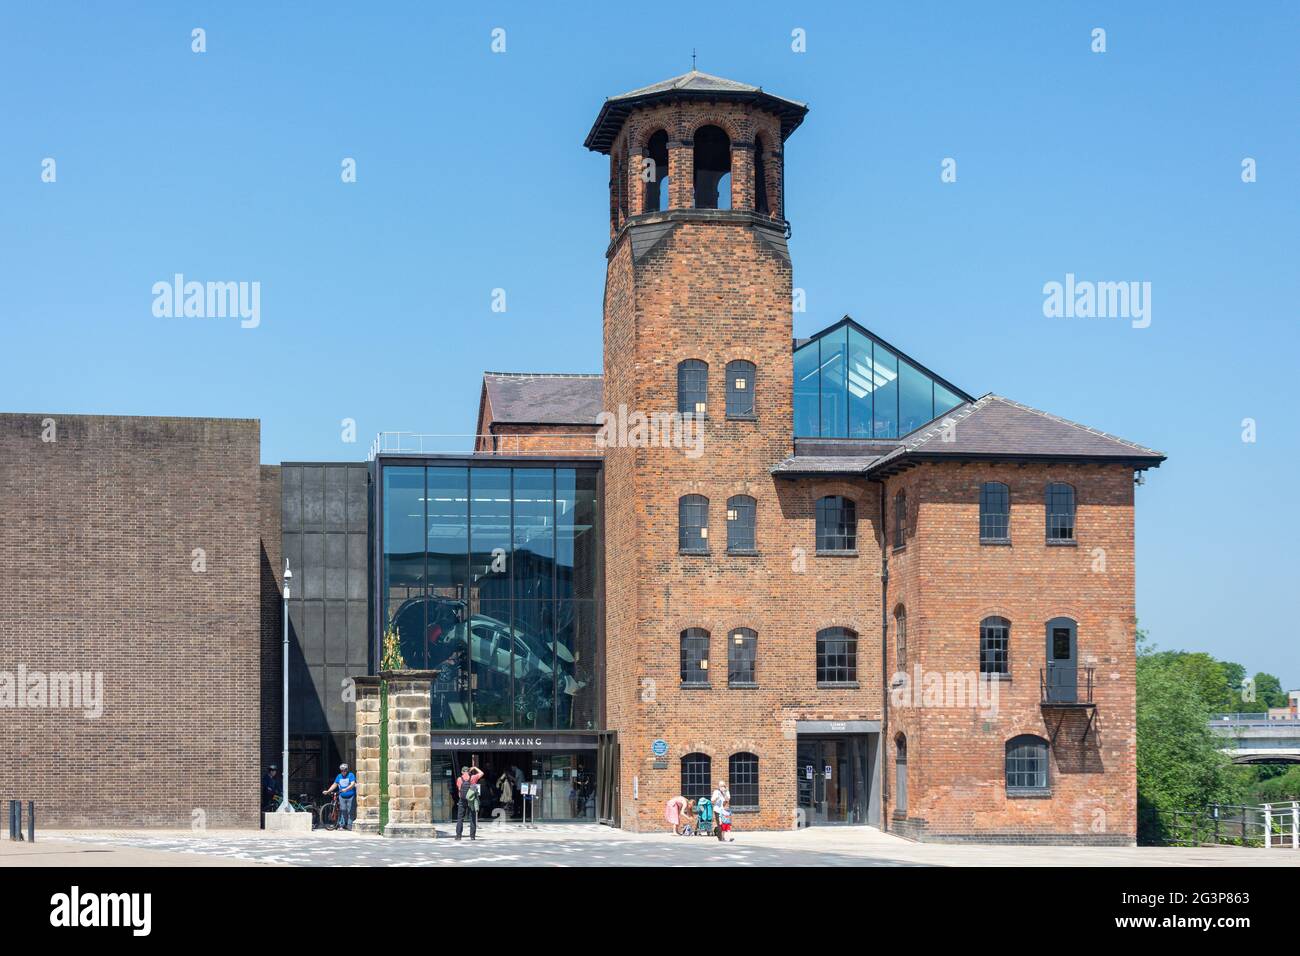 The Museum of Making at Derby Silk Mill, Silk Mill Lane, Riverside, Derby, Derbyshire, England, United Kingdom Stock Photo